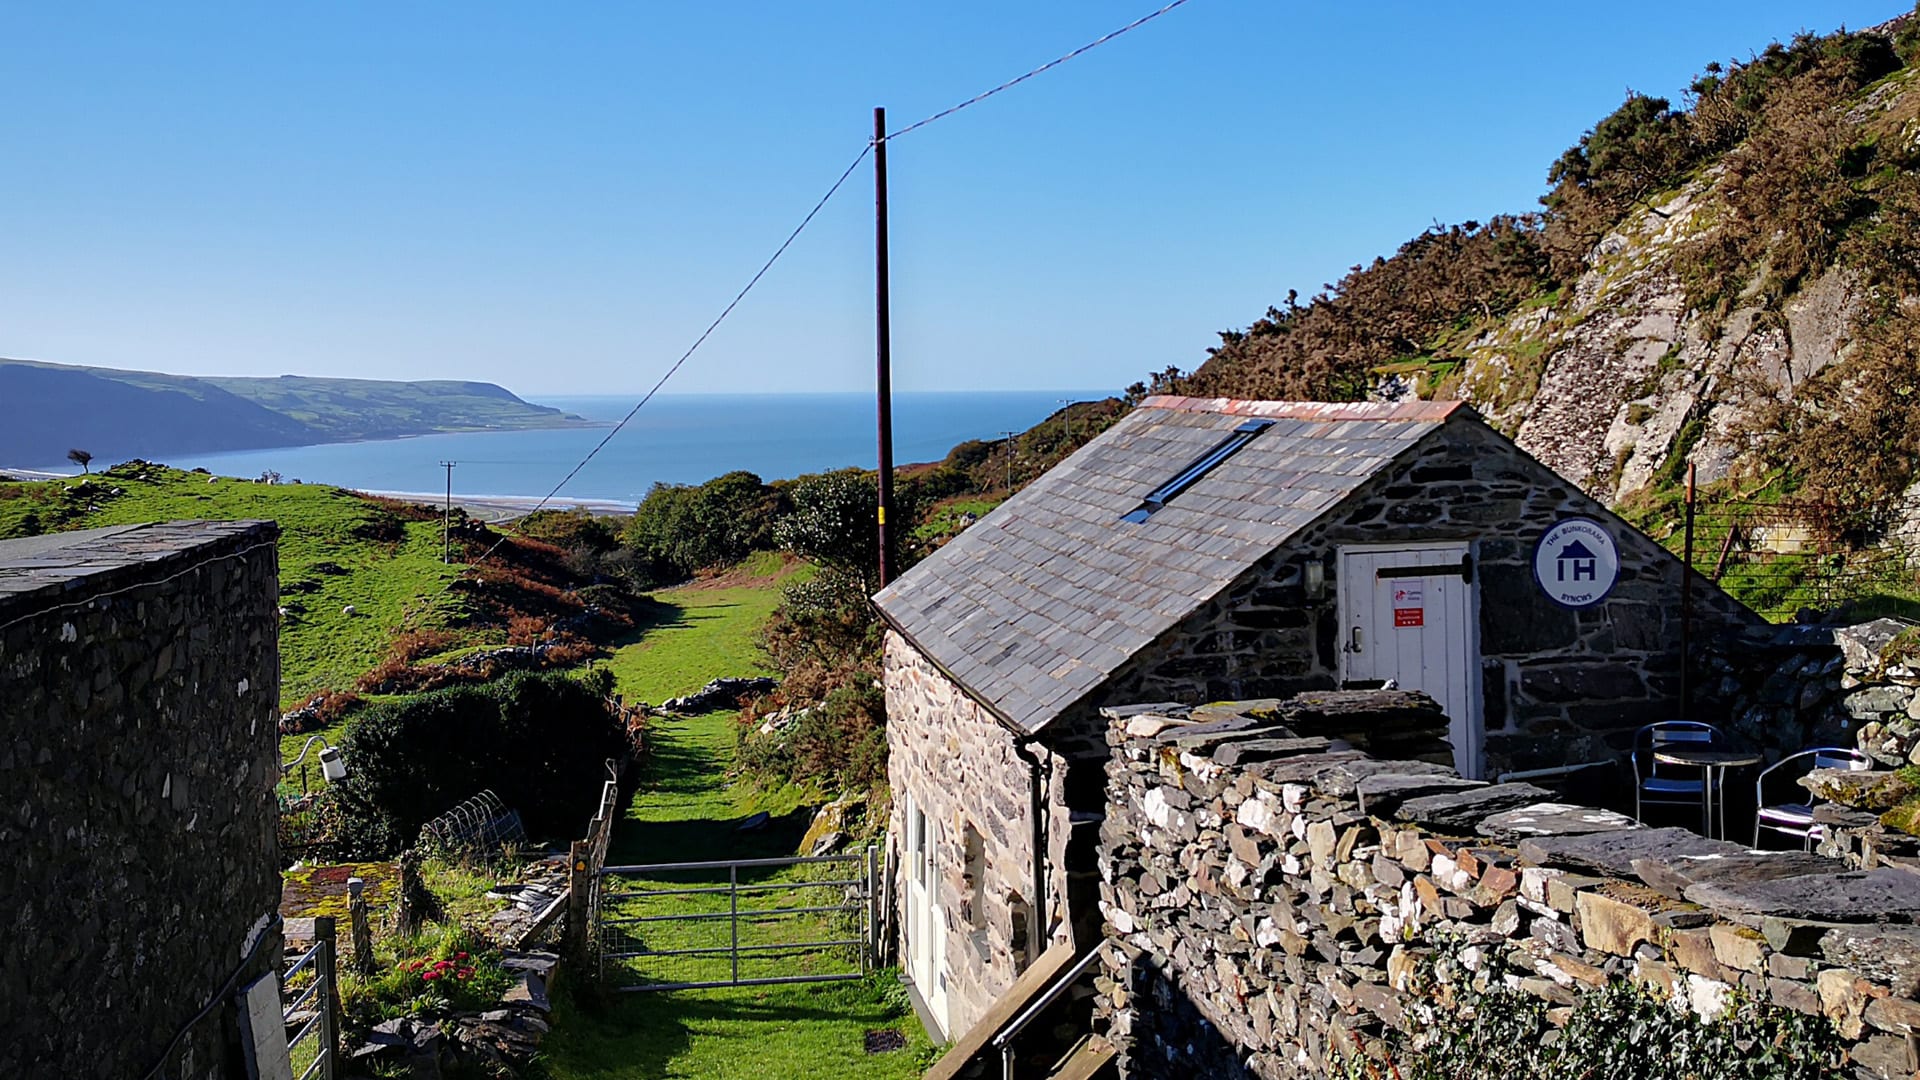 Small Hostels: Small hostels, bunkhouses and bothies in Scotland, England and Wales